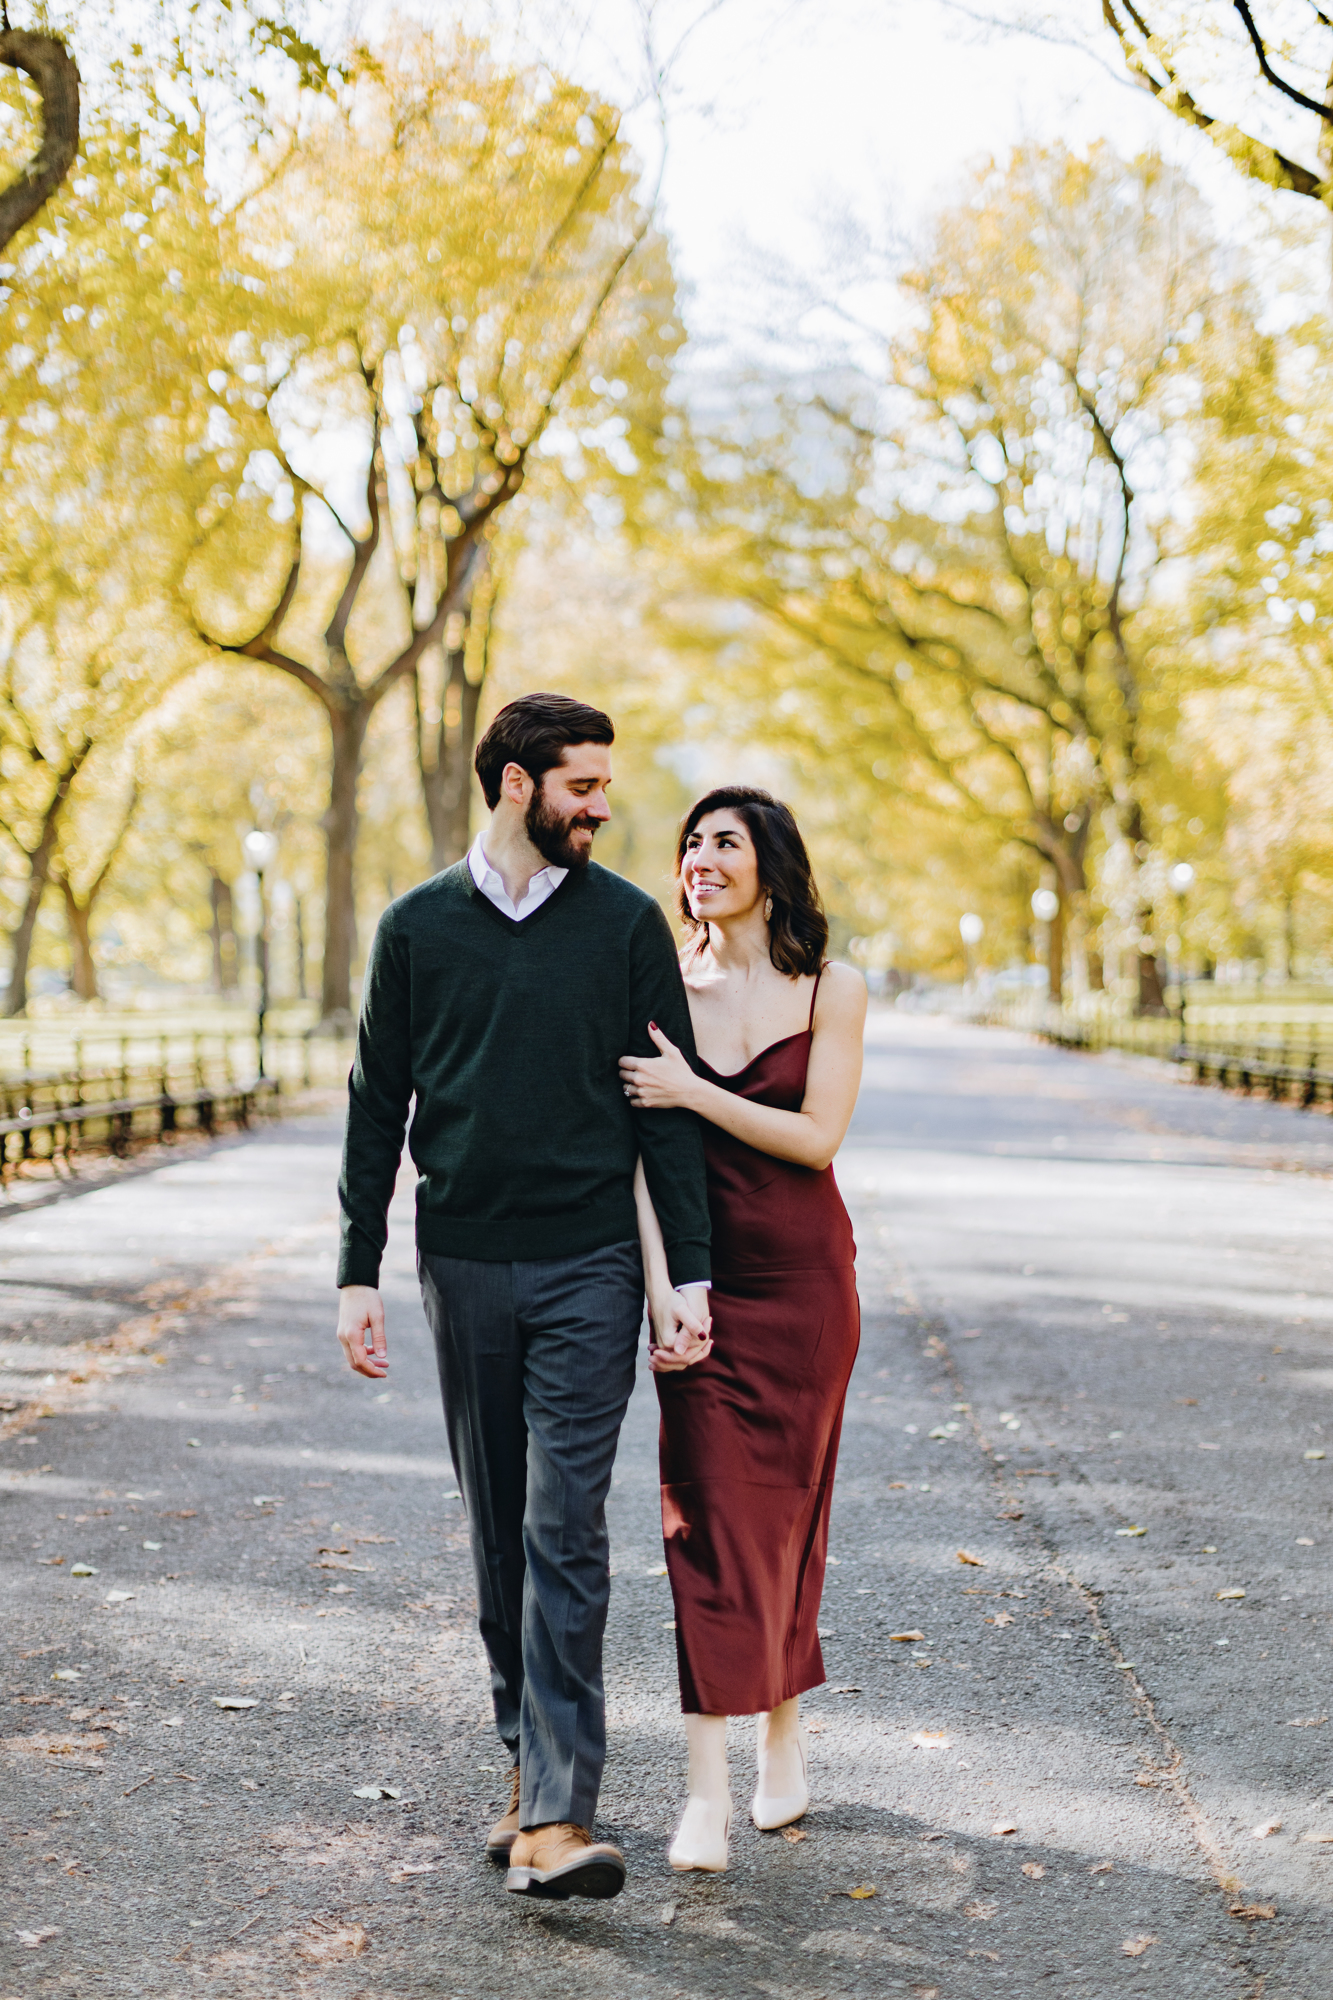 Jaw-dropping Engagement Photo Sessions in NYC